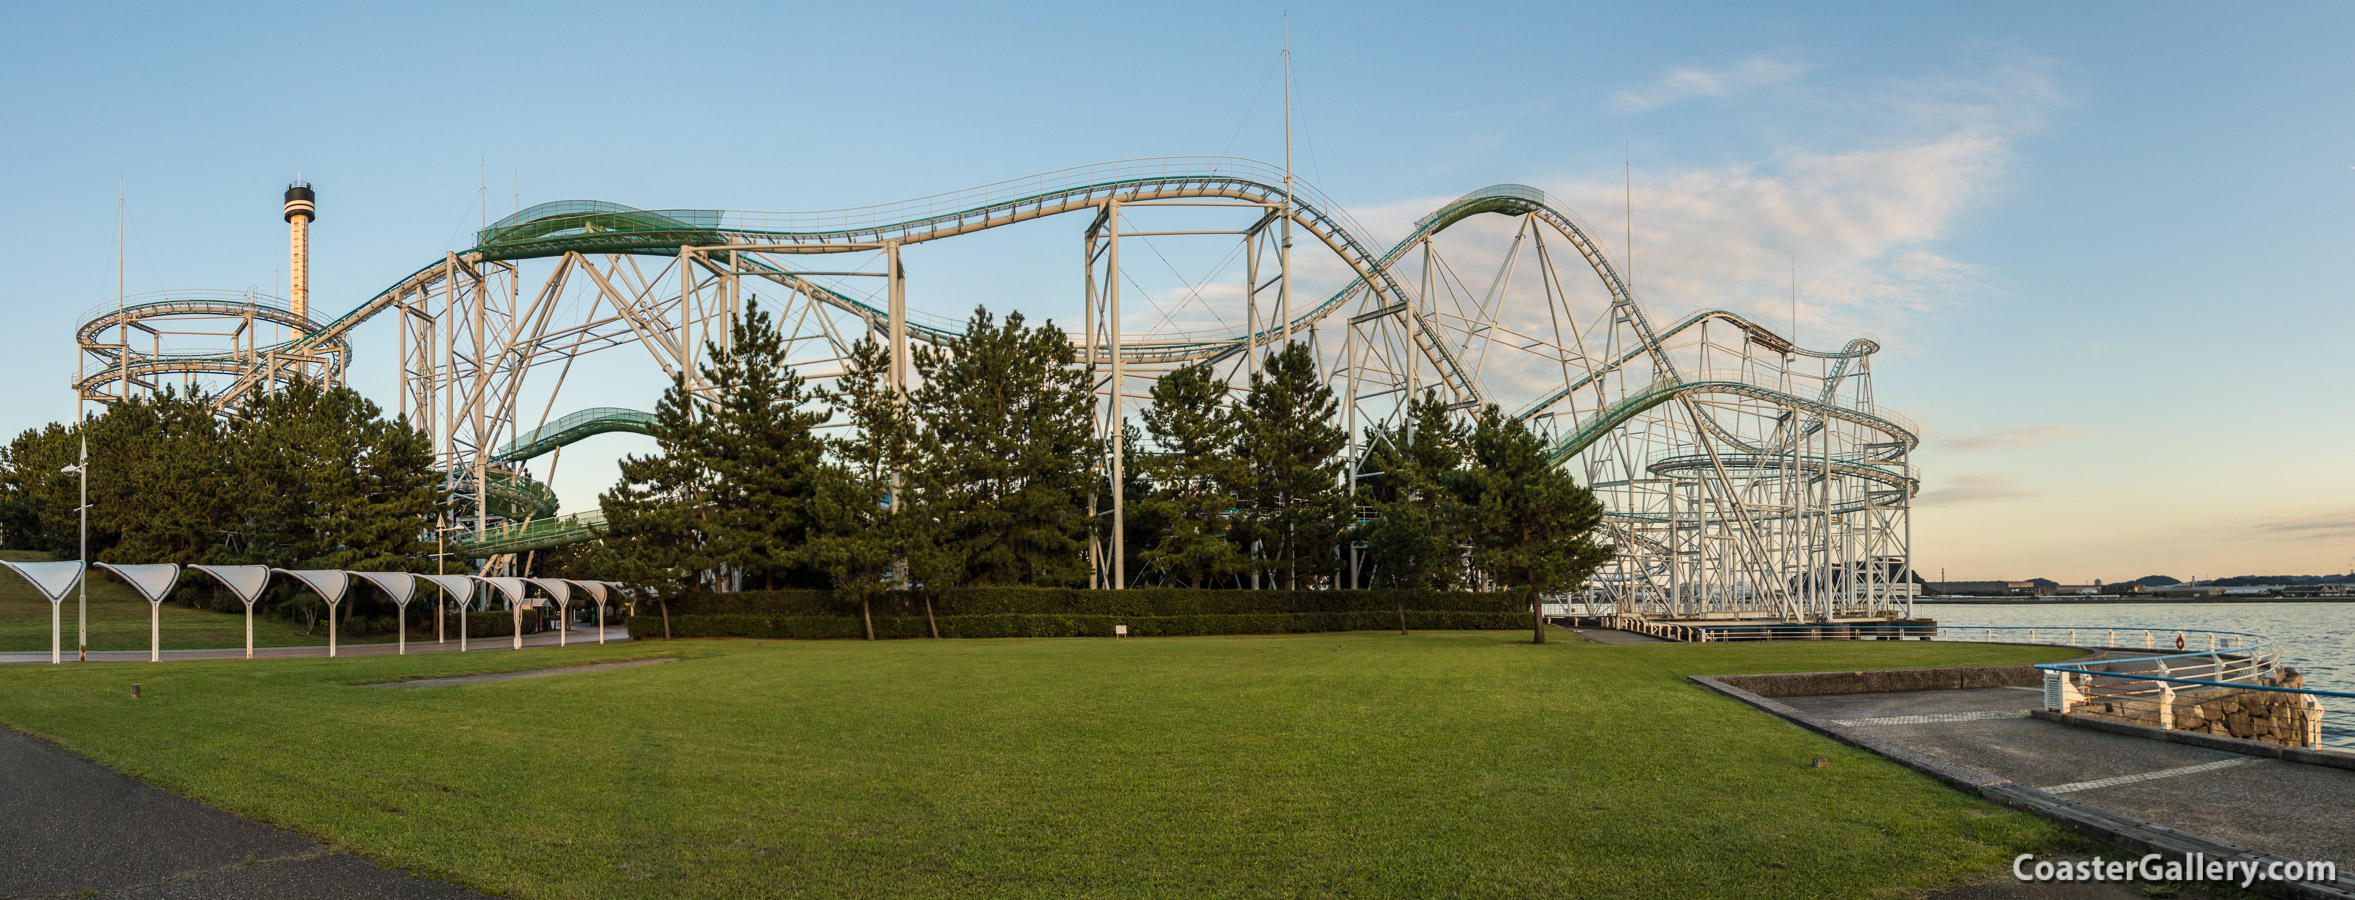 Panorama picture of the Surf Coaster Leviathan roller coaster in Sea Paradise in Tokyo, Japan